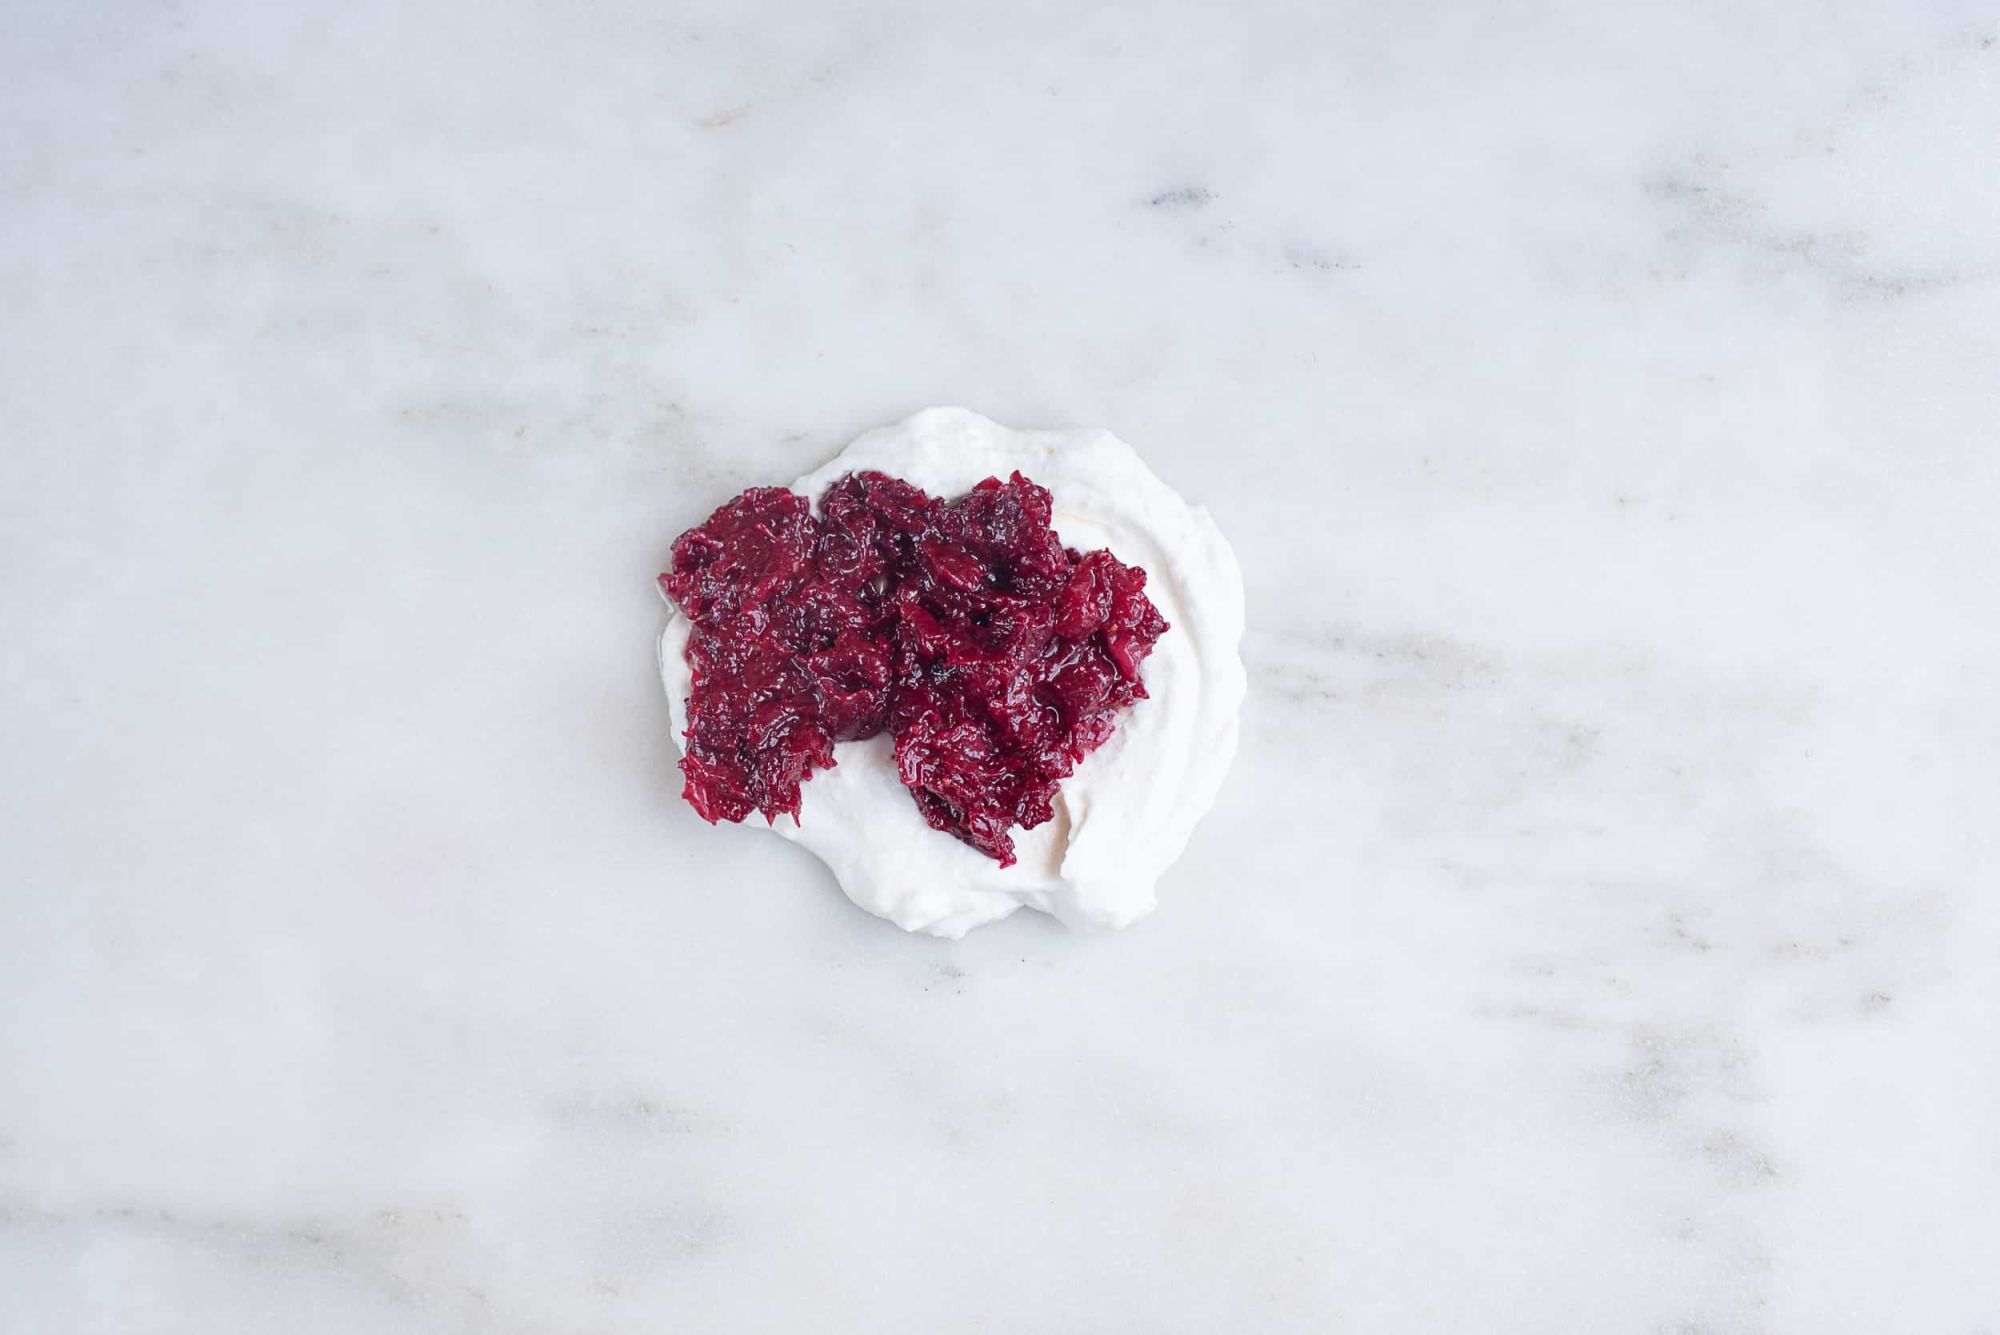 pile of ricotta cheese topped with cranberry sauce, sitting on a countertop